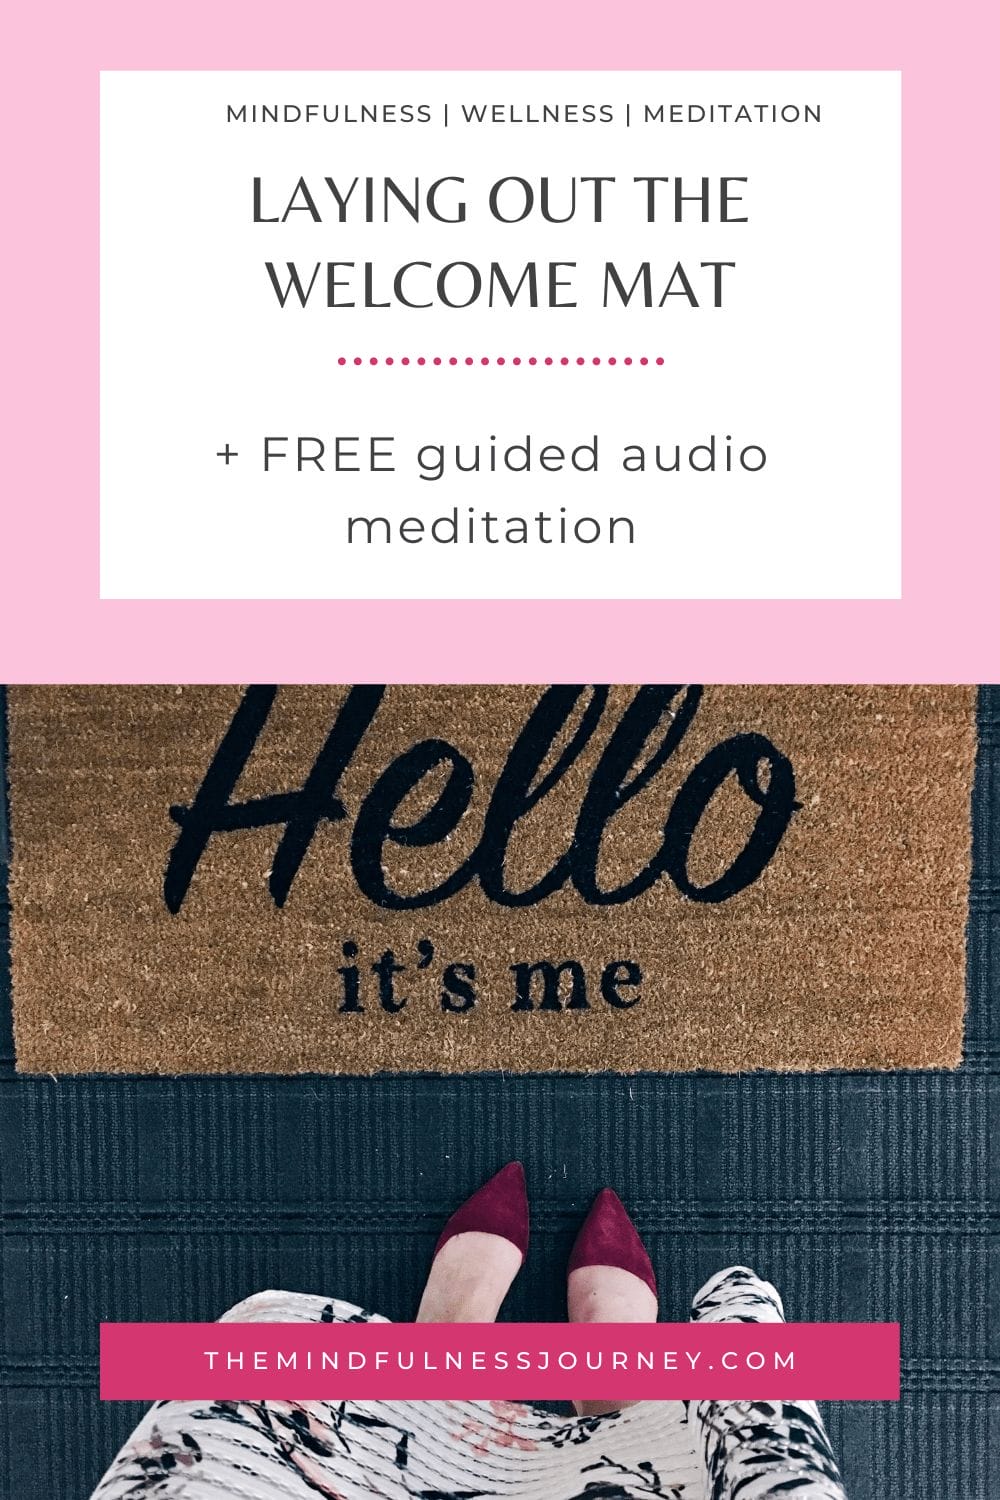 Laying out the welcome mat | meditation | mindfulness